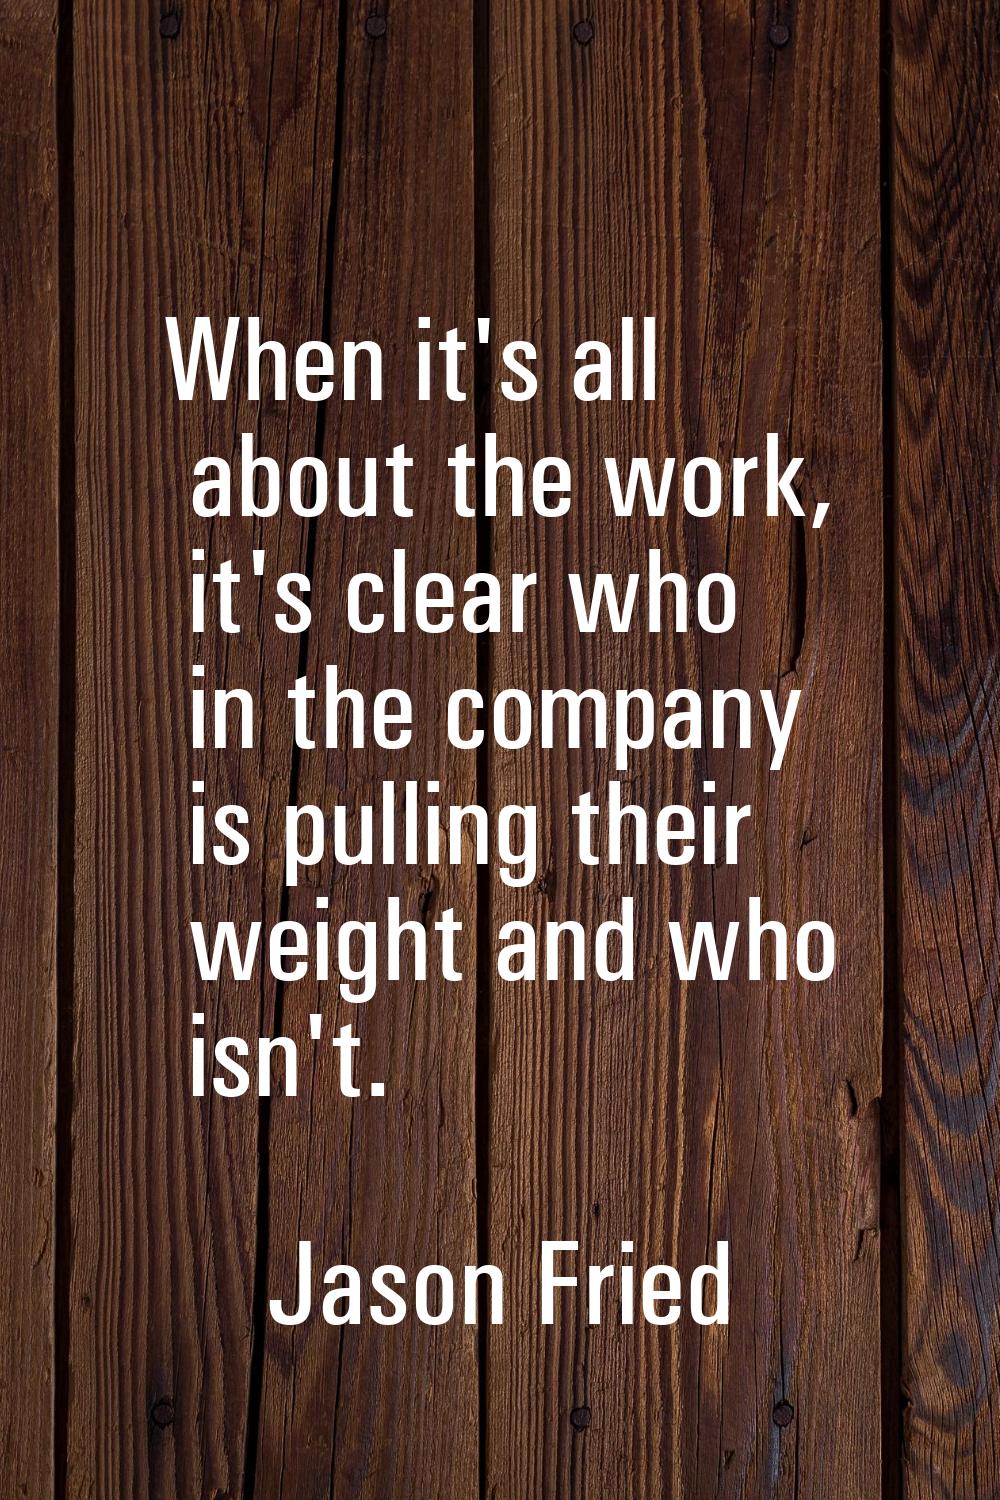 When it's all about the work, it's clear who in the company is pulling their weight and who isn't.